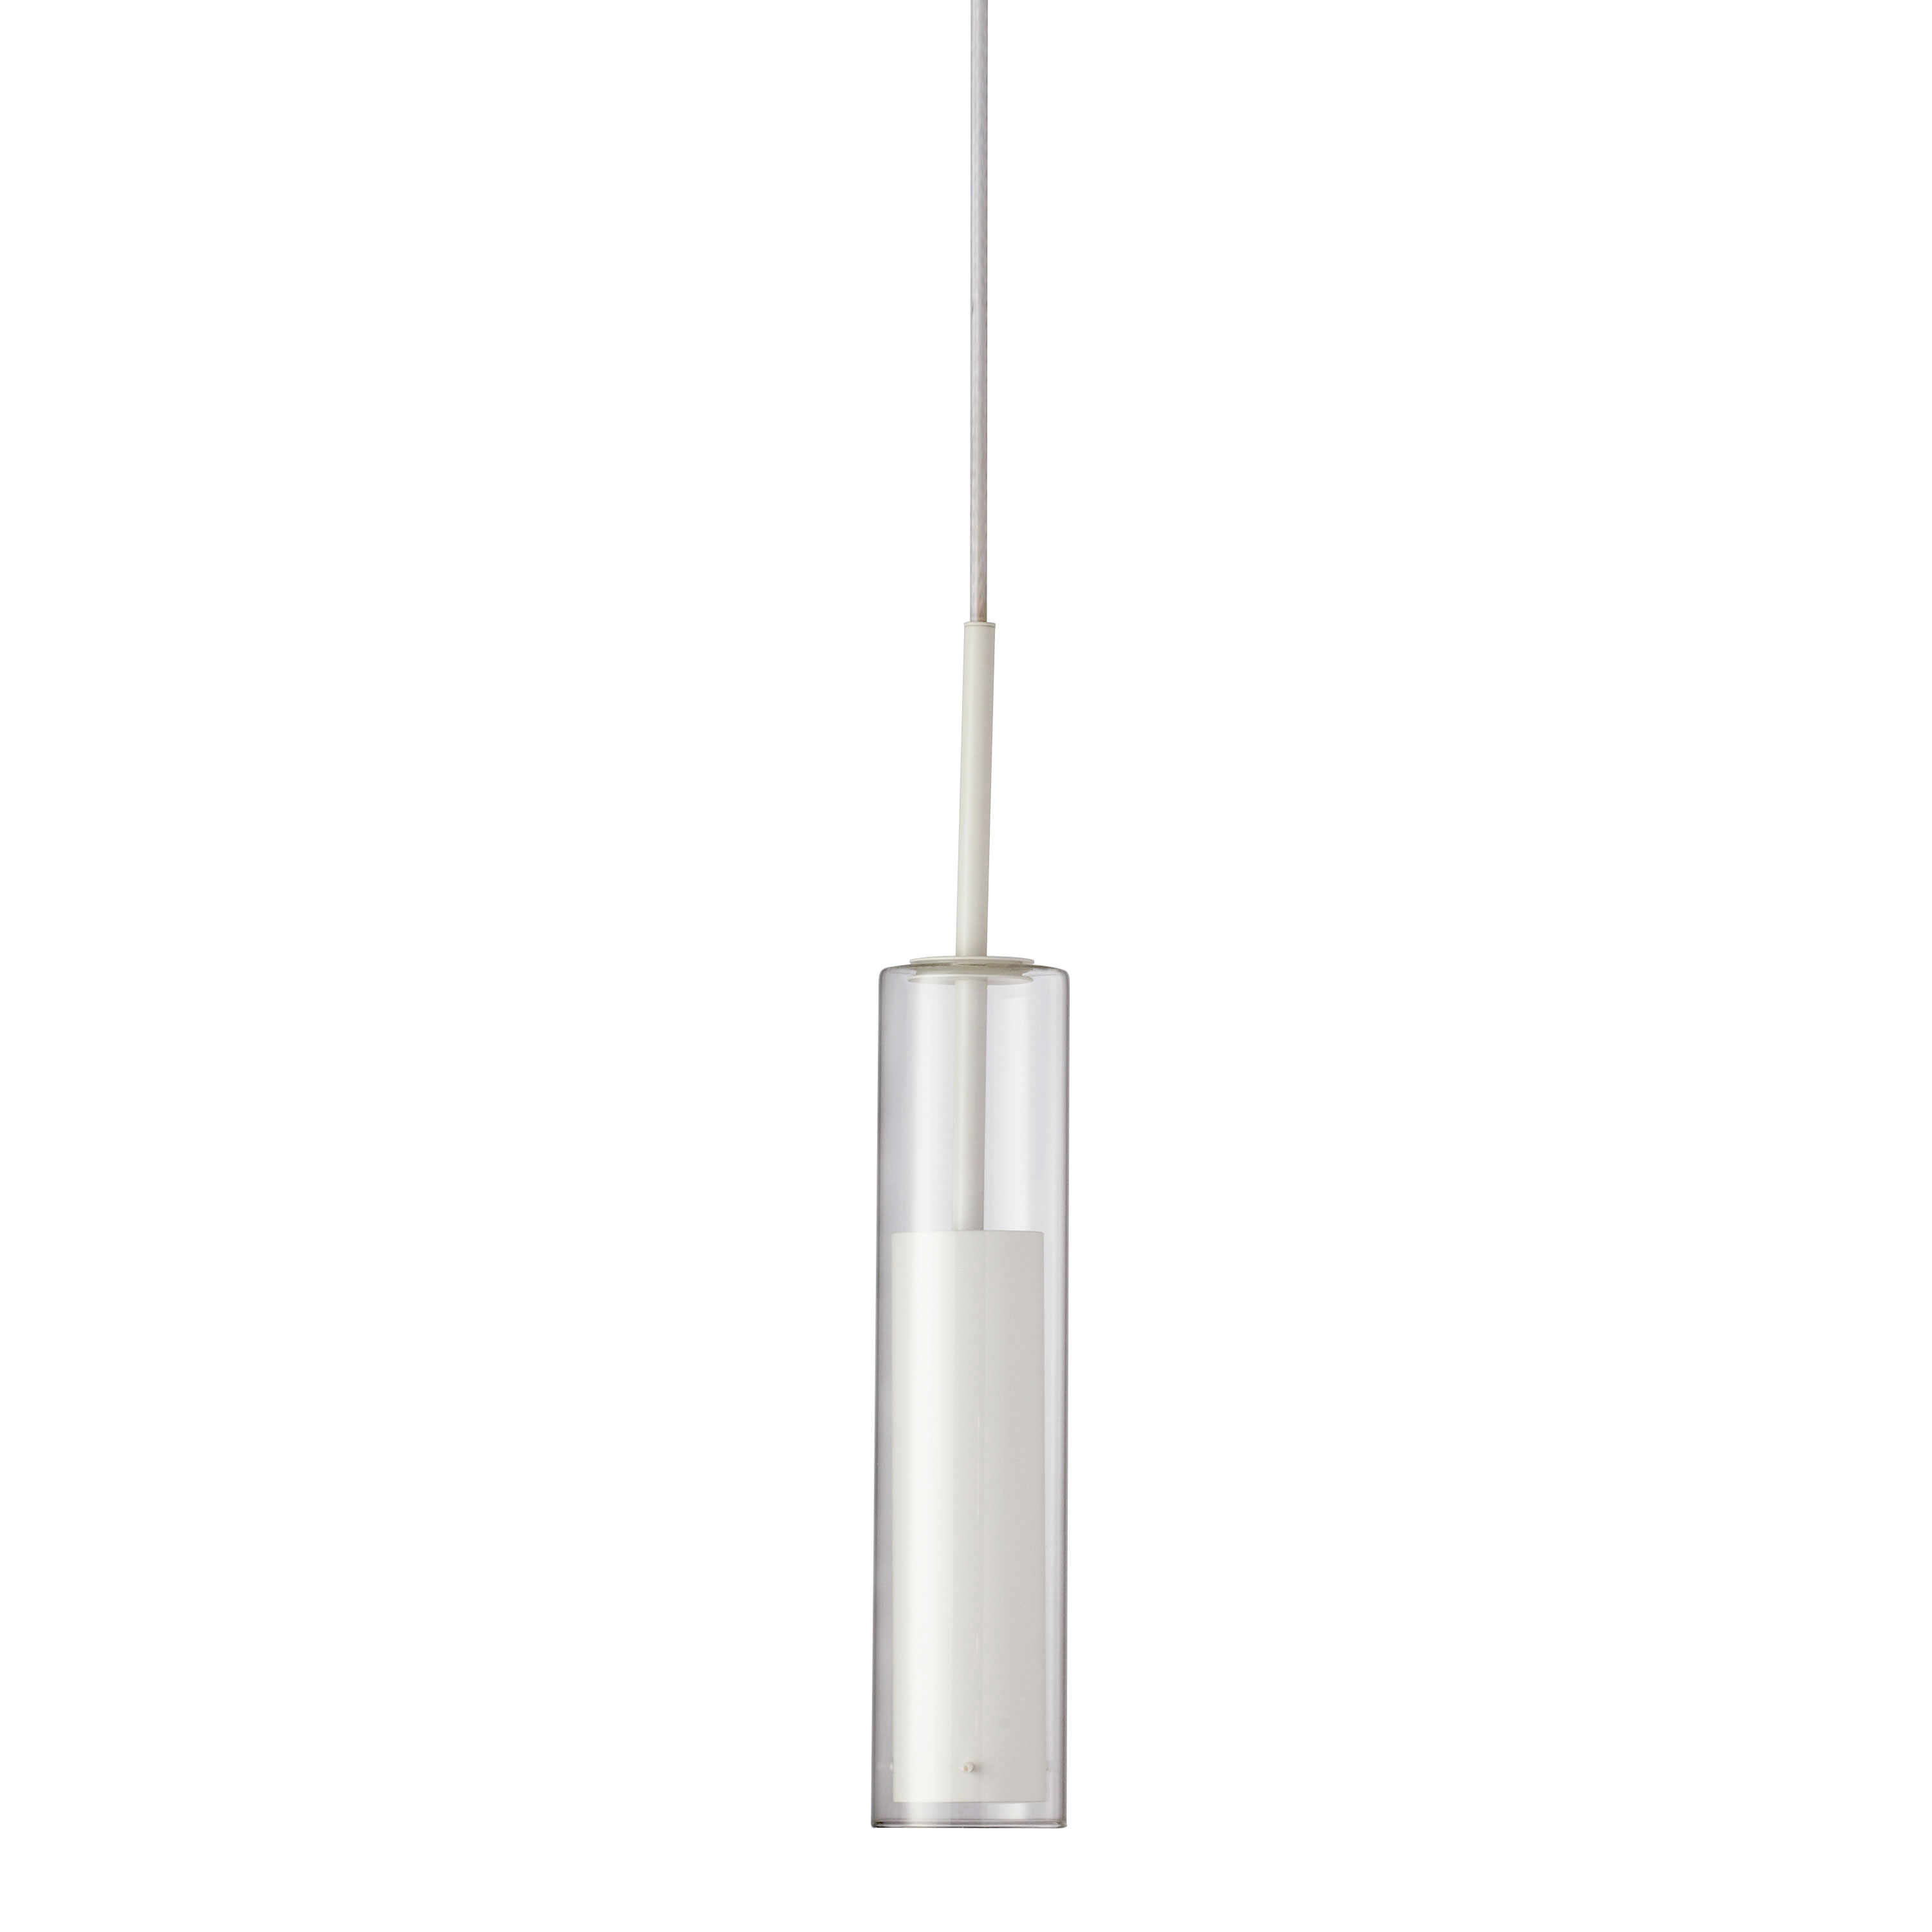 Luna lighting creates a focal point of modern design wherever you place it in your home. Its smooth, sleek lines will blend with any modern or contemporary design schemes, including minimalist décor. The metal frame drops to a cylindrical housing for the lighting, effectively encased in a clear class cylindrical housing. Optional metal finishes allow you to create looks from sleek to dramatically stylish. Luna lighting, with its elegant yet modest profile, is perfect for hallways, kitchen and dining rooms.